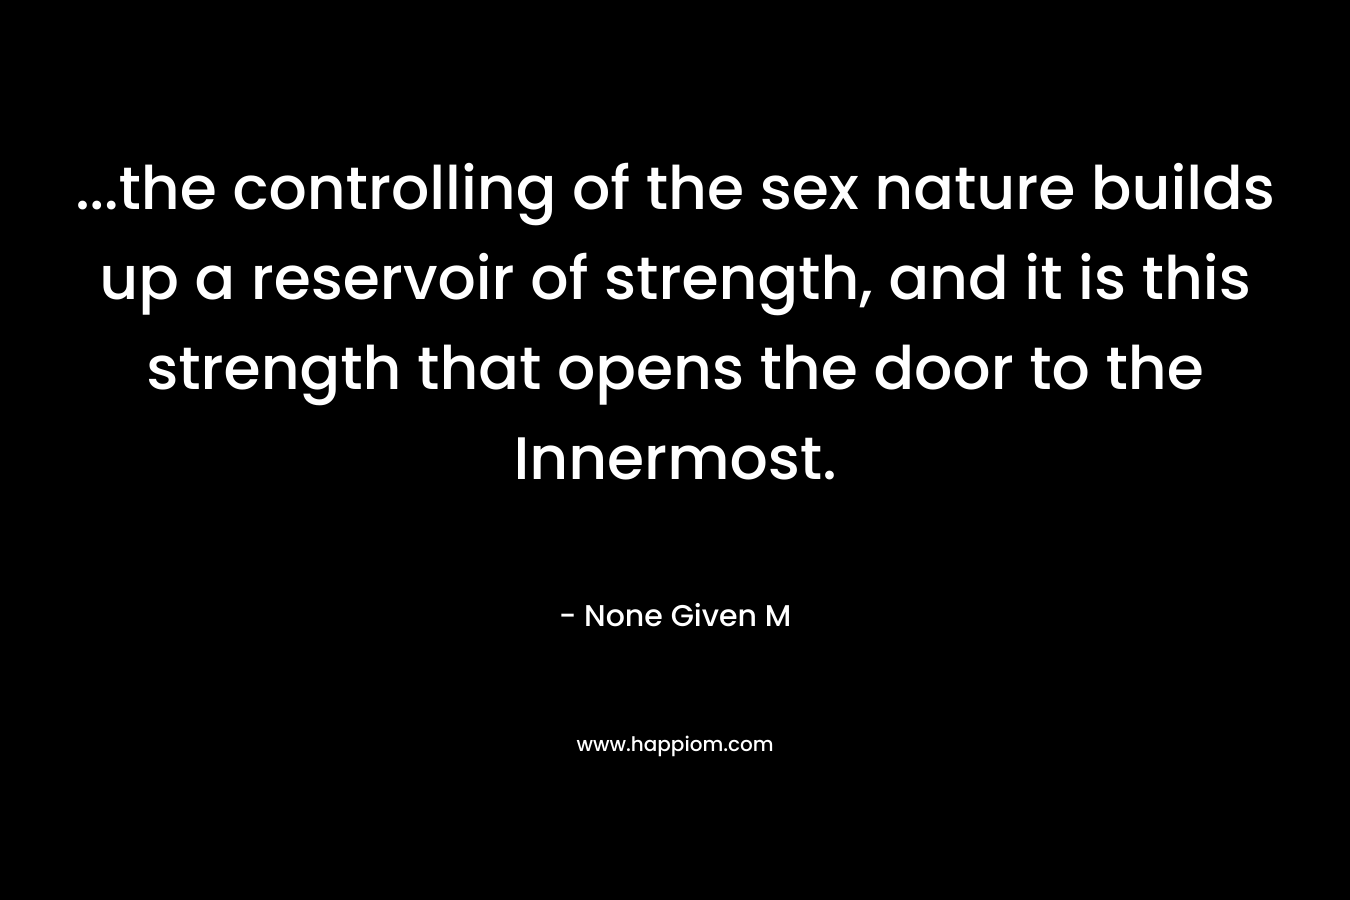 …the controlling of the sex nature builds up a reservoir of strength, and it is this strength that opens the door to the Innermost. – None Given M